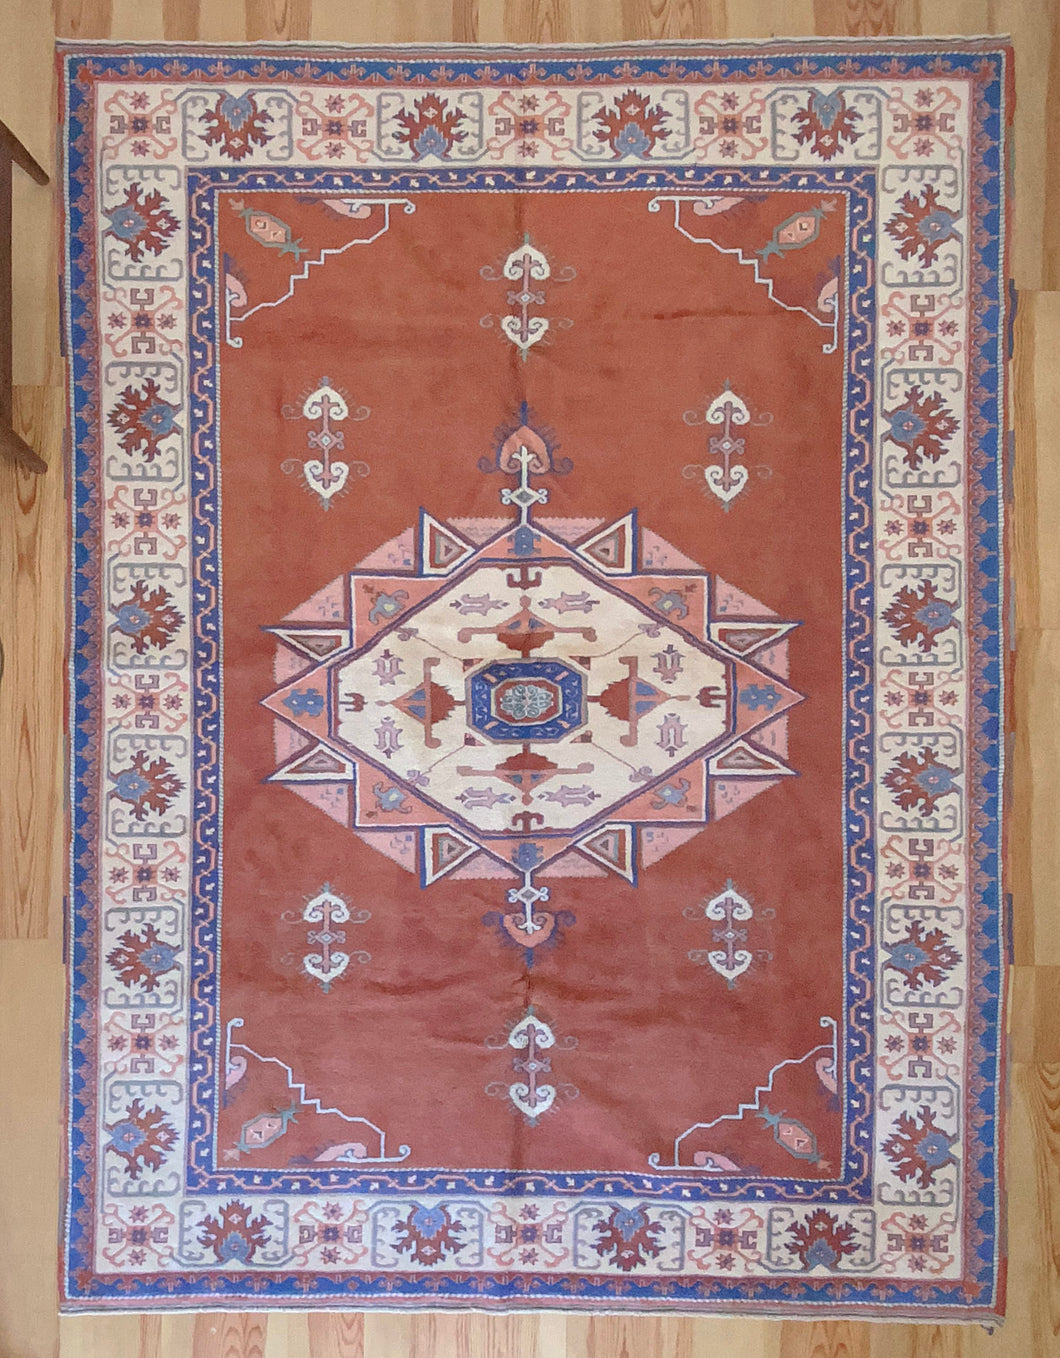 8x10 Vintage Central Anatolian 'Sultanhan' Turkish Area Rug | Star Design Bold Medallion Placed in Octagonal Design Spacious Field with Stylized Motifs Light Field | SKU 648